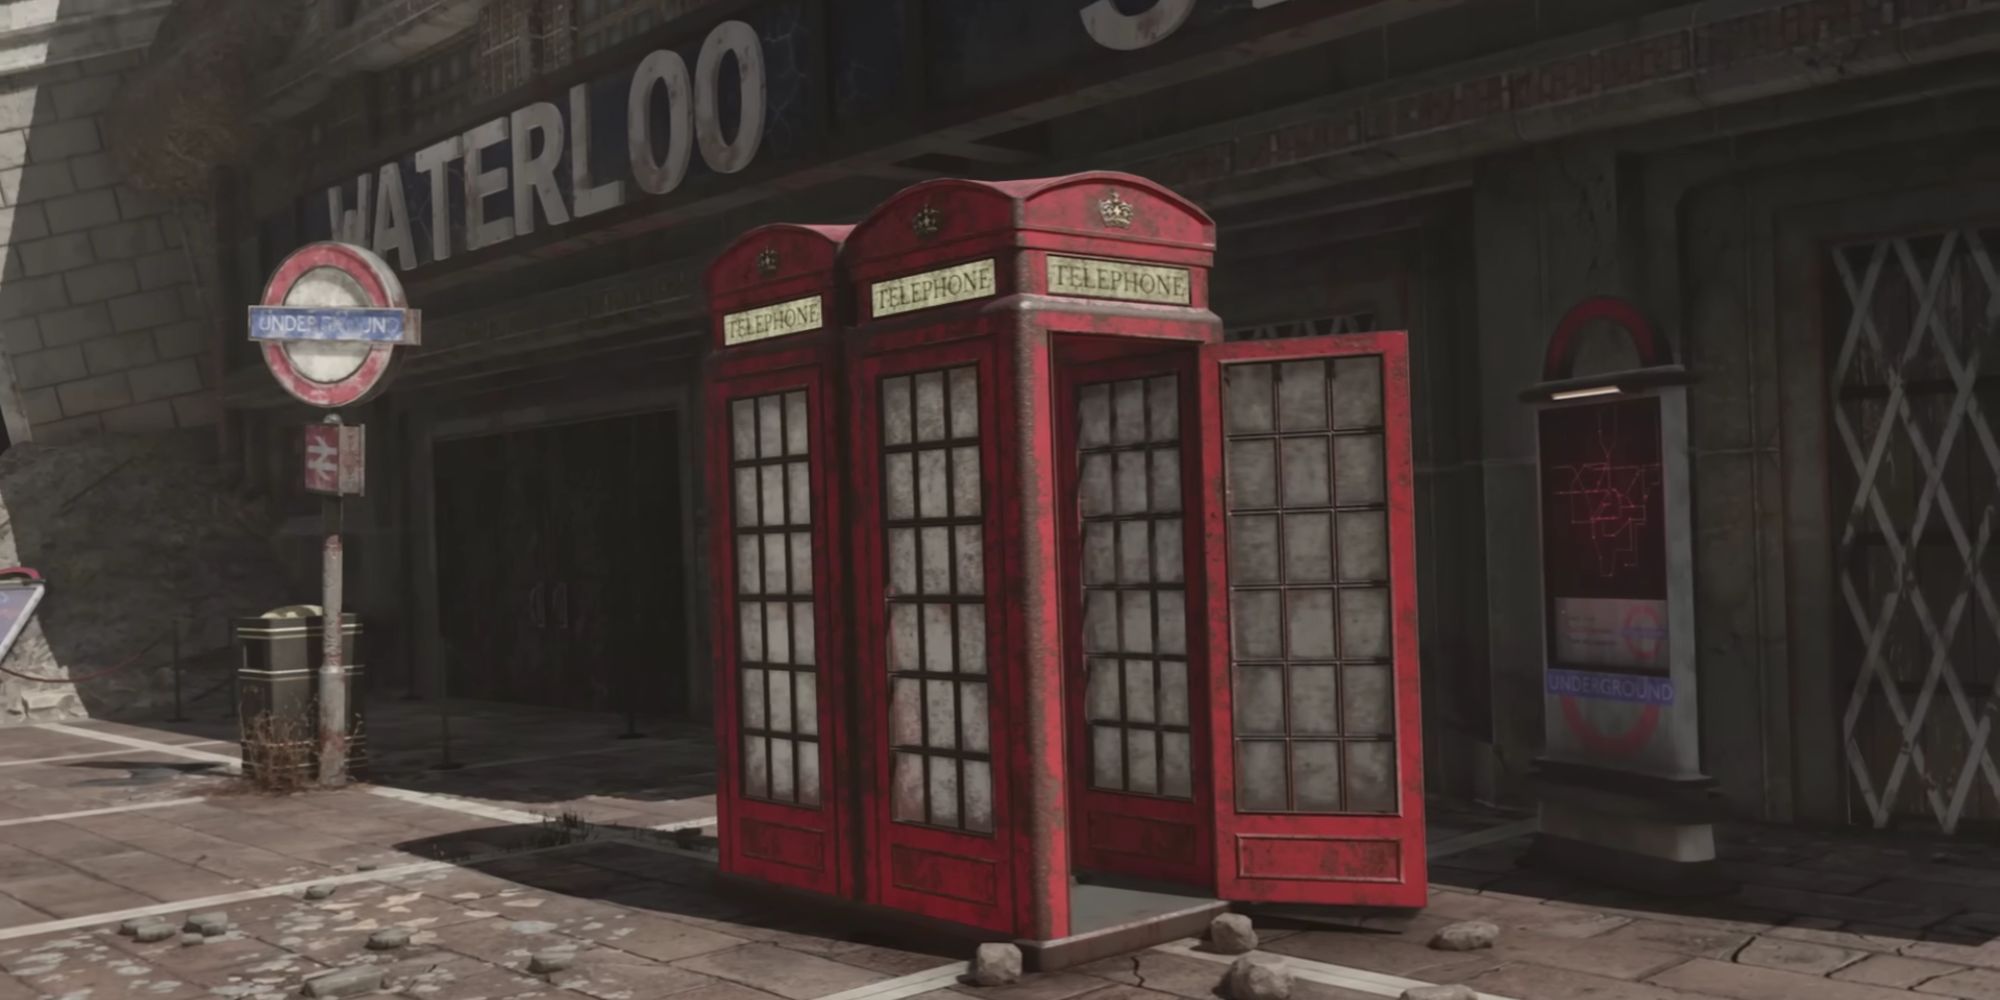 A red phone booth in Fallout London.